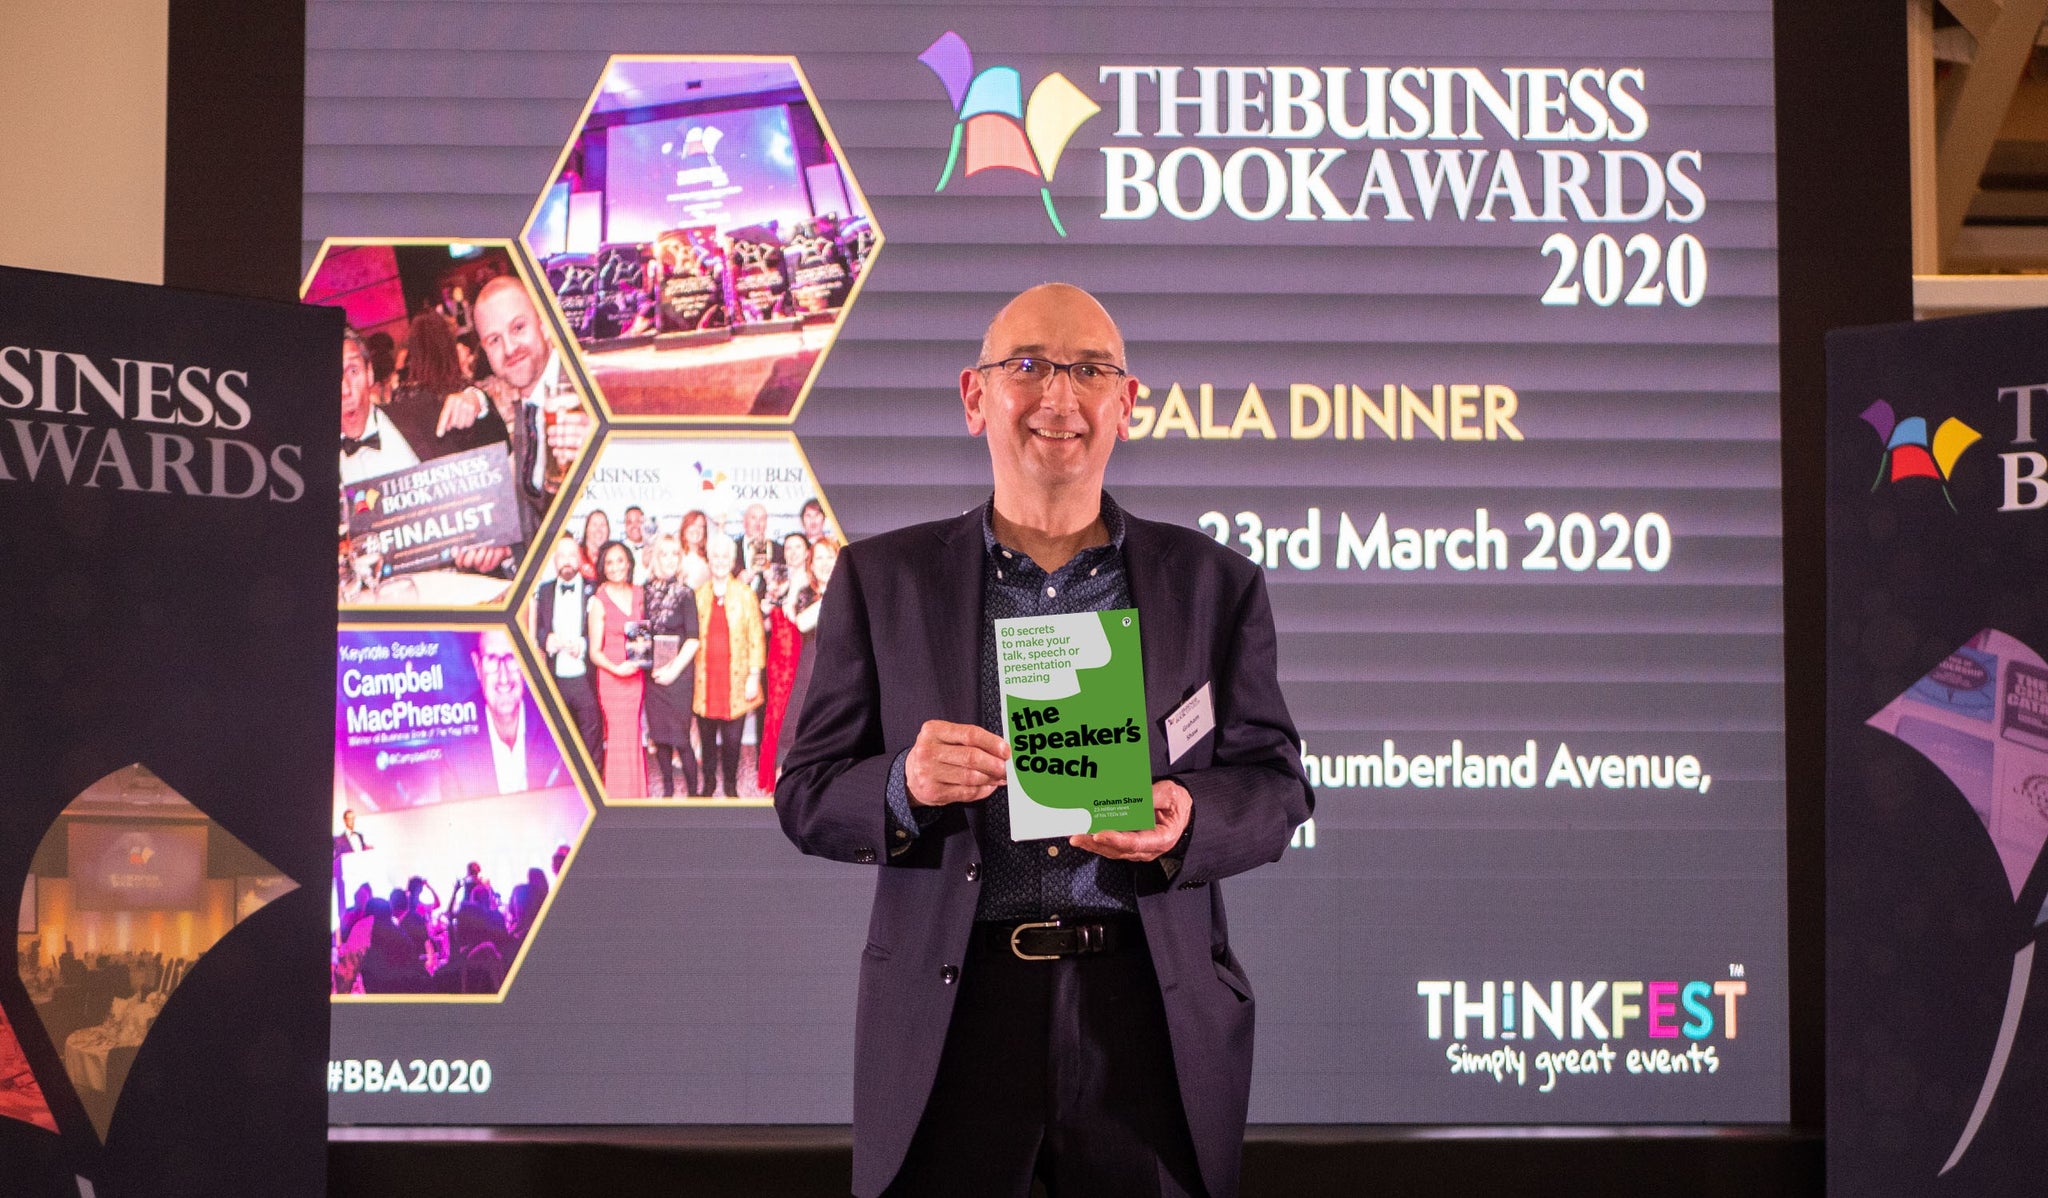 ‘The Speaker's Coach: Finalist in Business Book Awards 2020